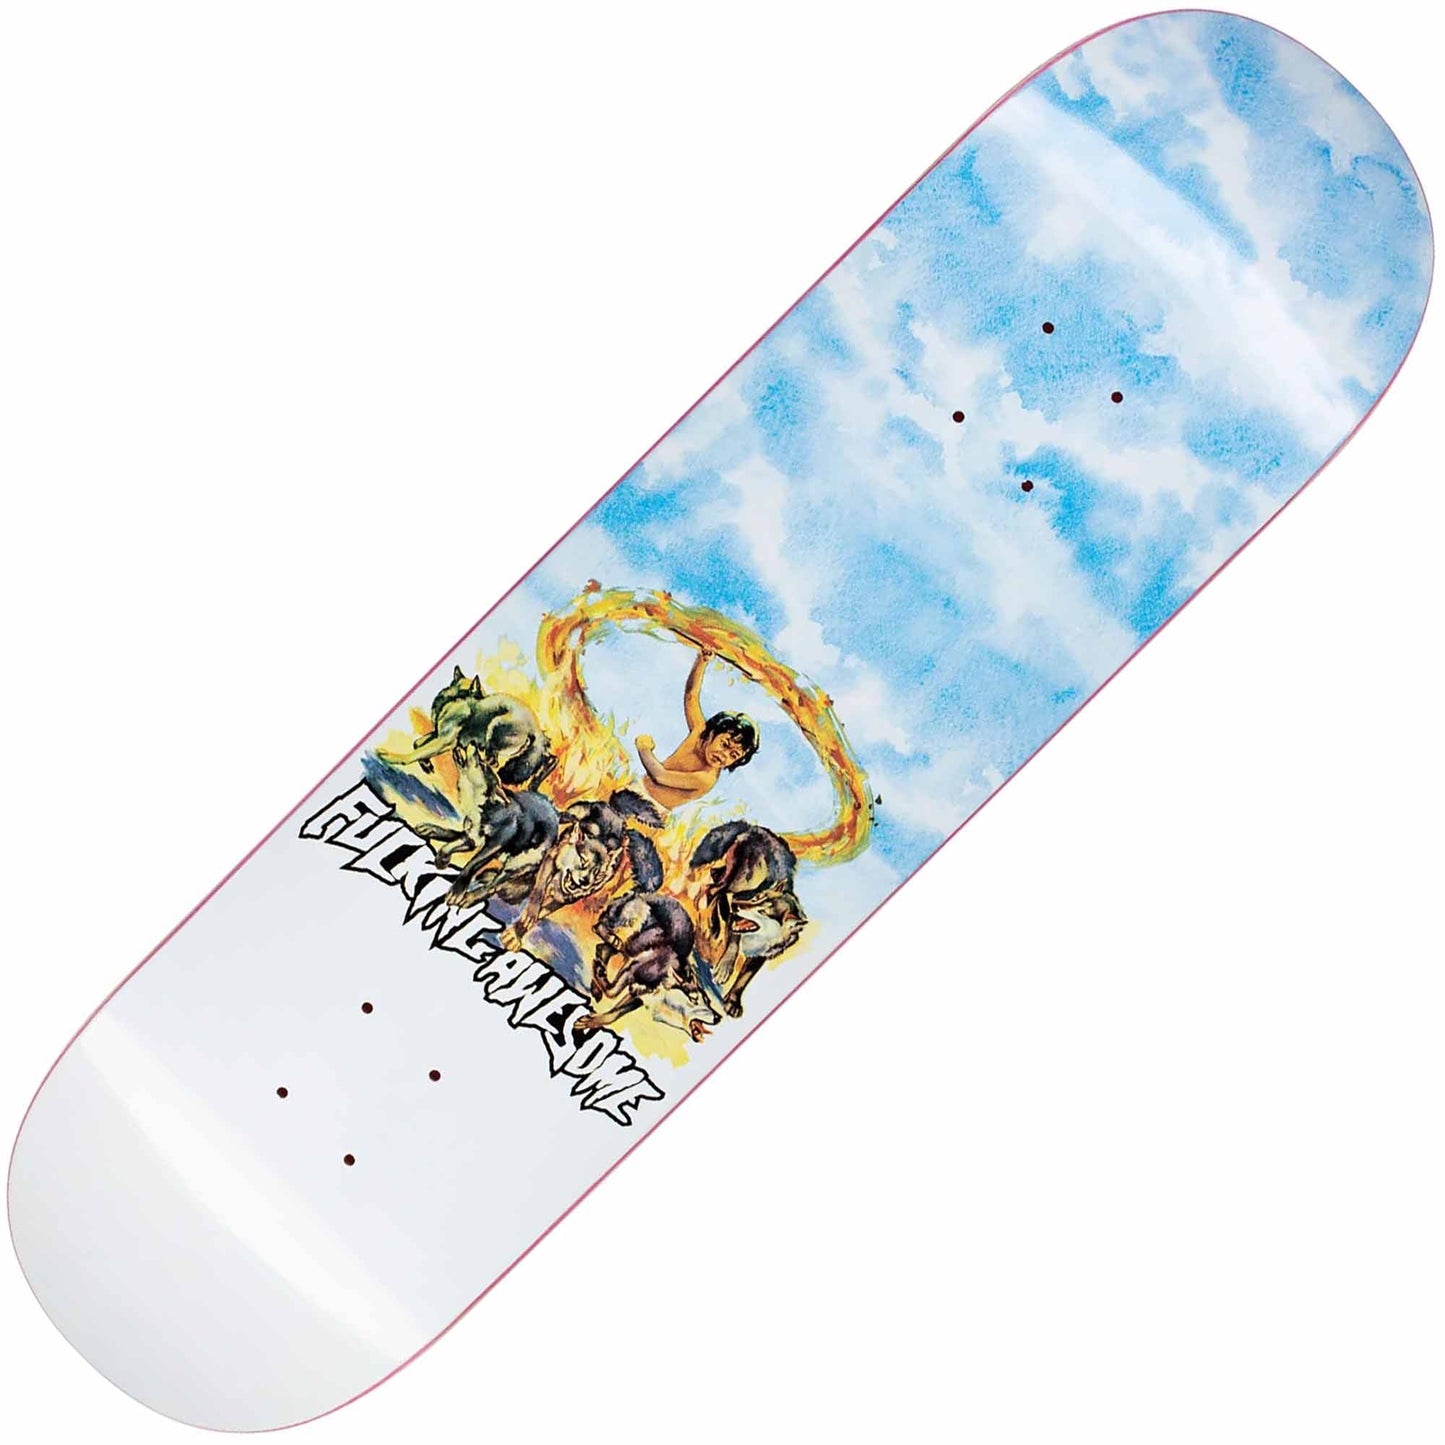 Fucking Awesome Louie Fire Child Deck (8.25") - Tiki Room Skateboards - 1